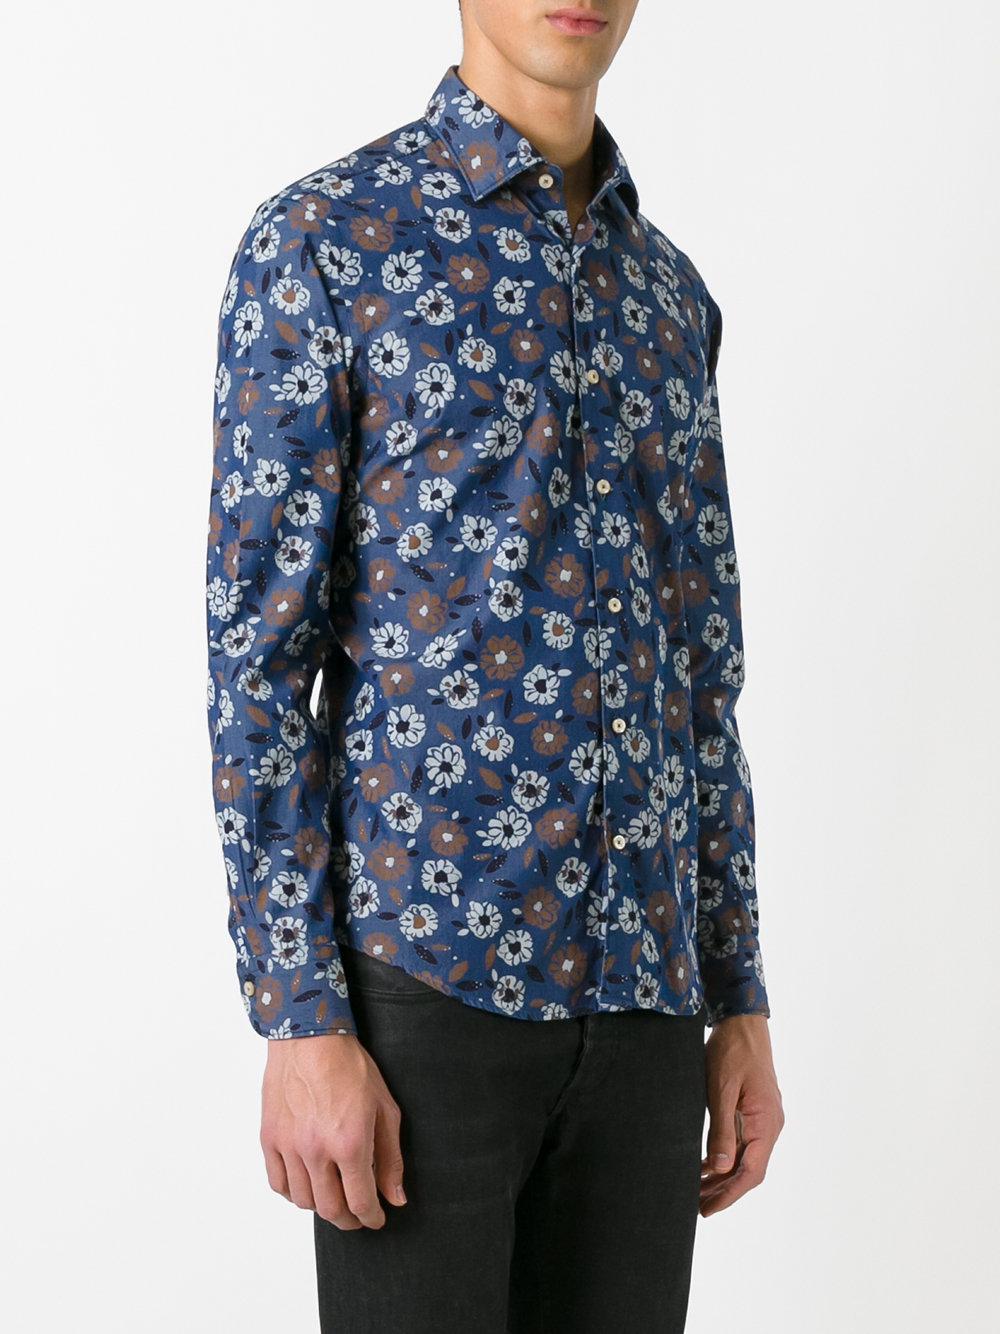 Xacus Cotton Floral Print Button-up Shirt in Blue for Men - Lyst